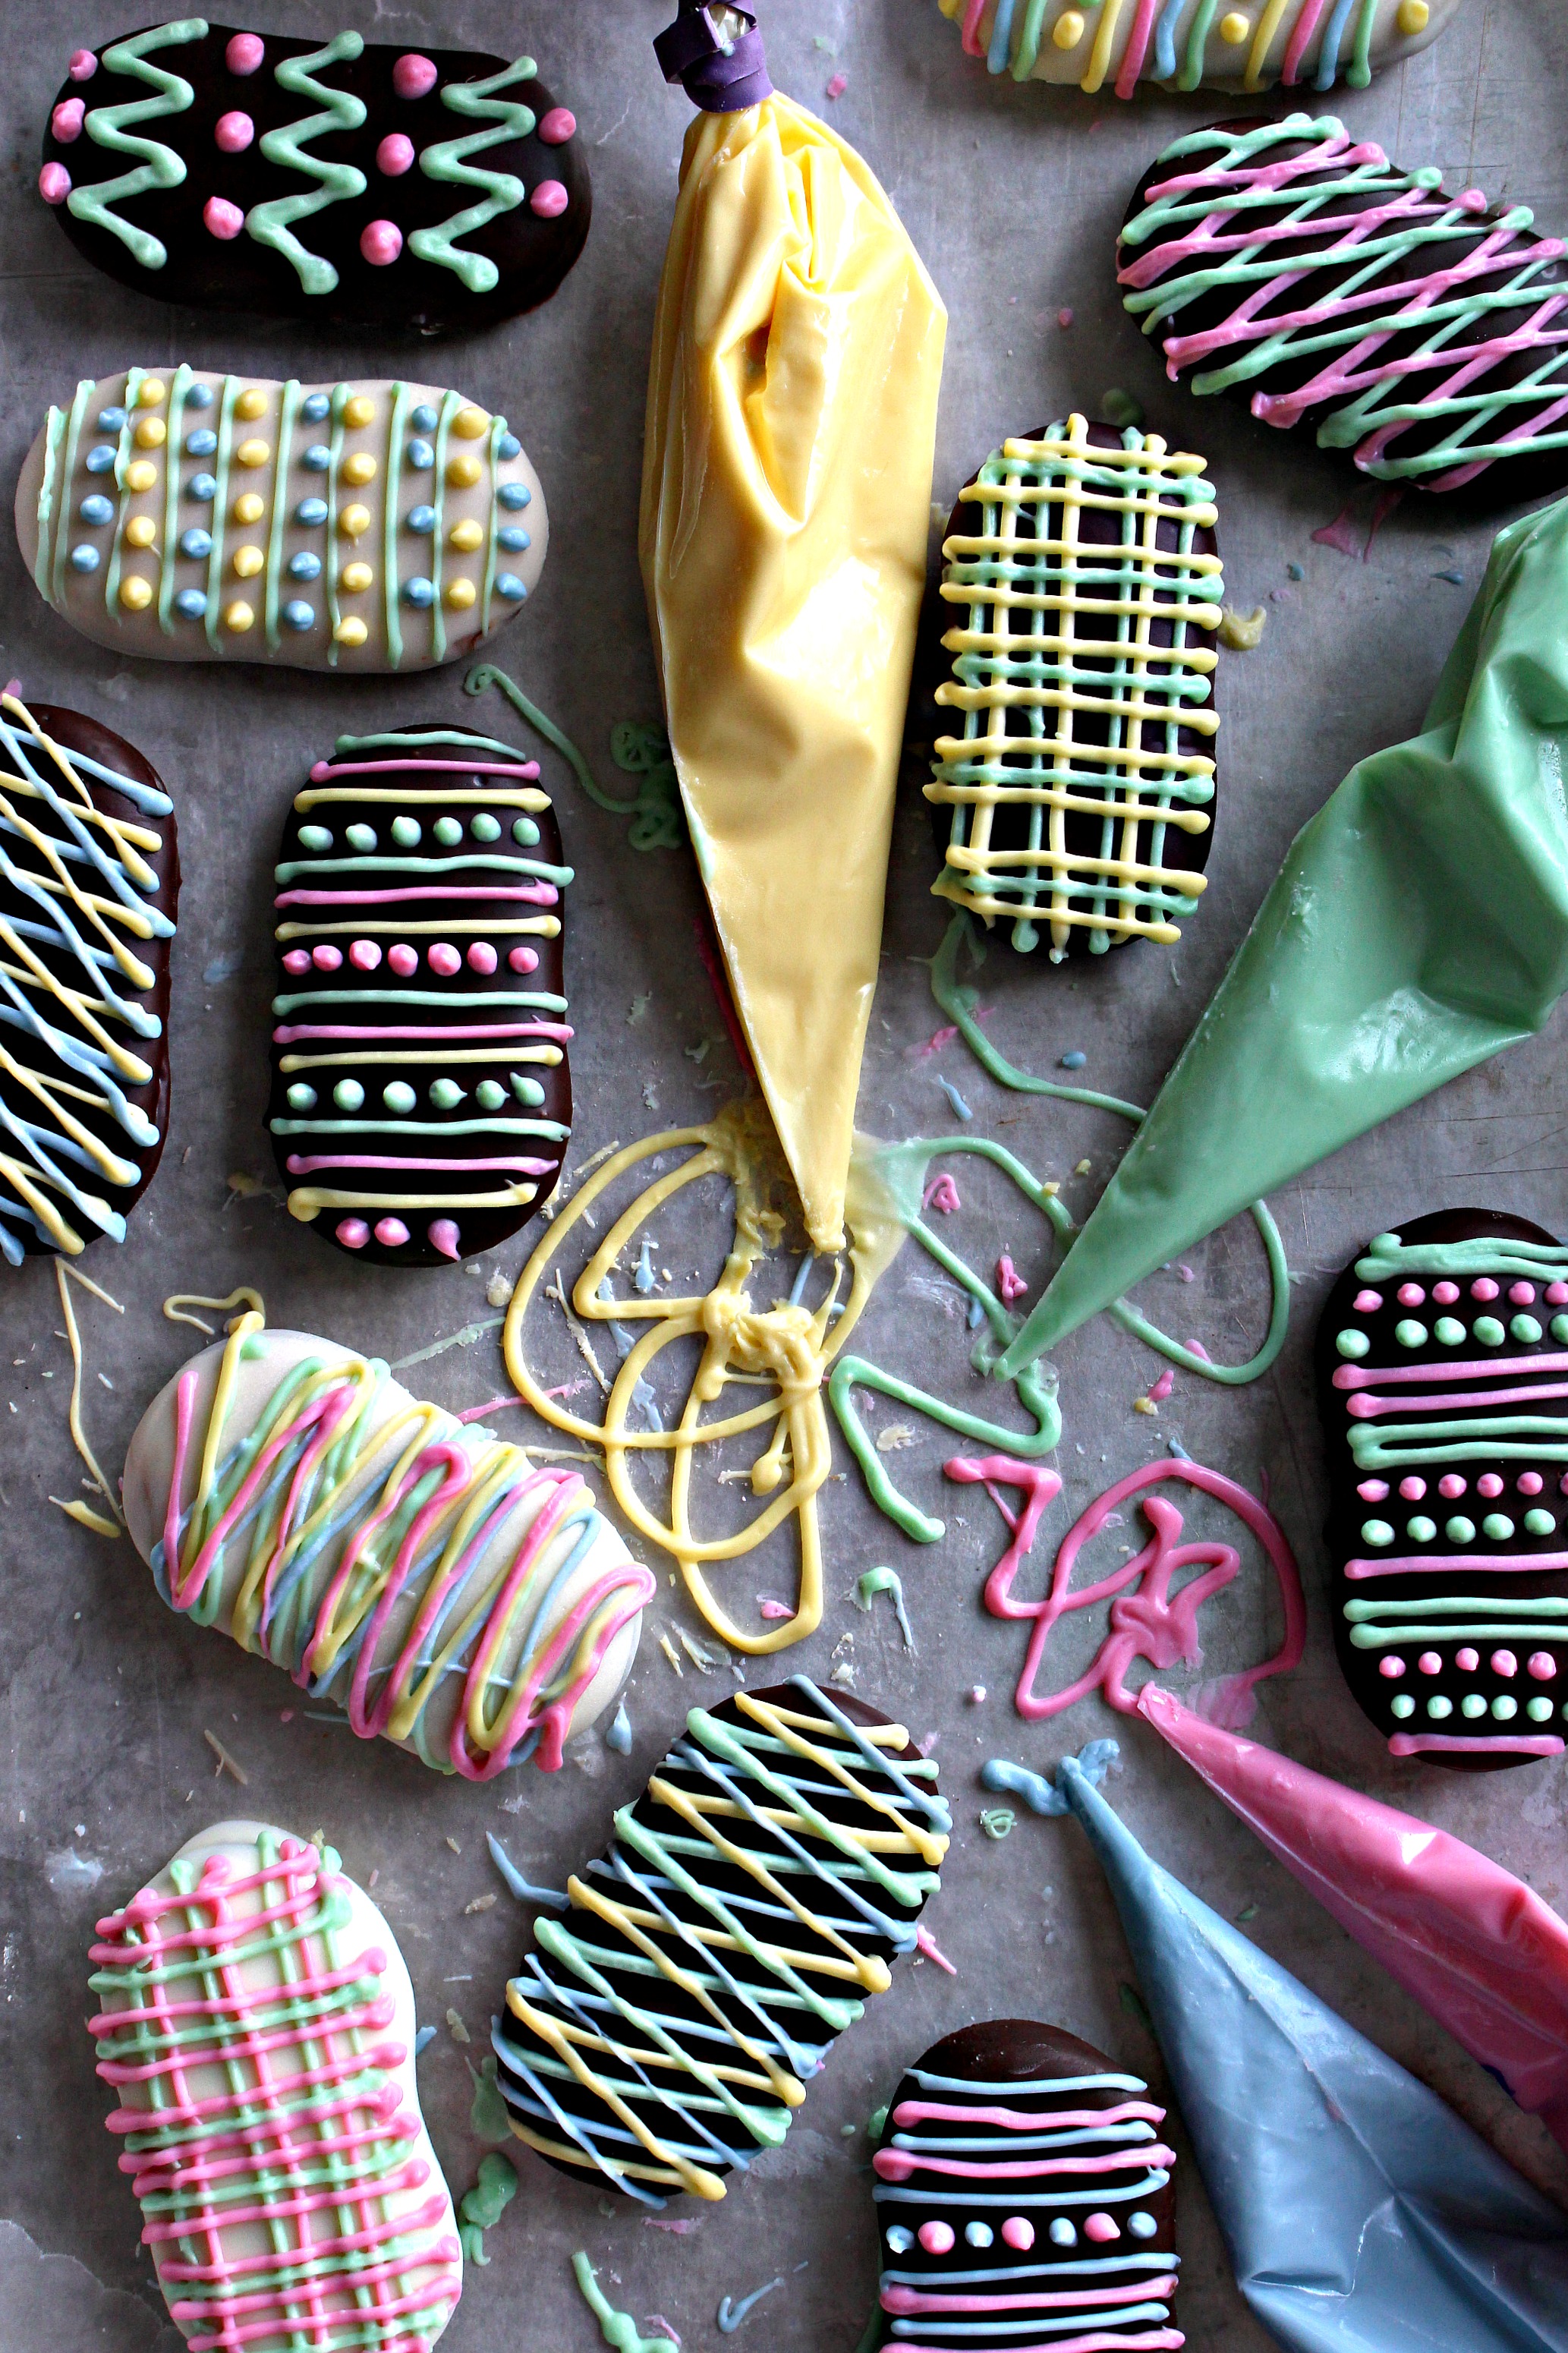 Milano Cookies coated in chocolate and decorated with colored chocolate to look like easter eggs.